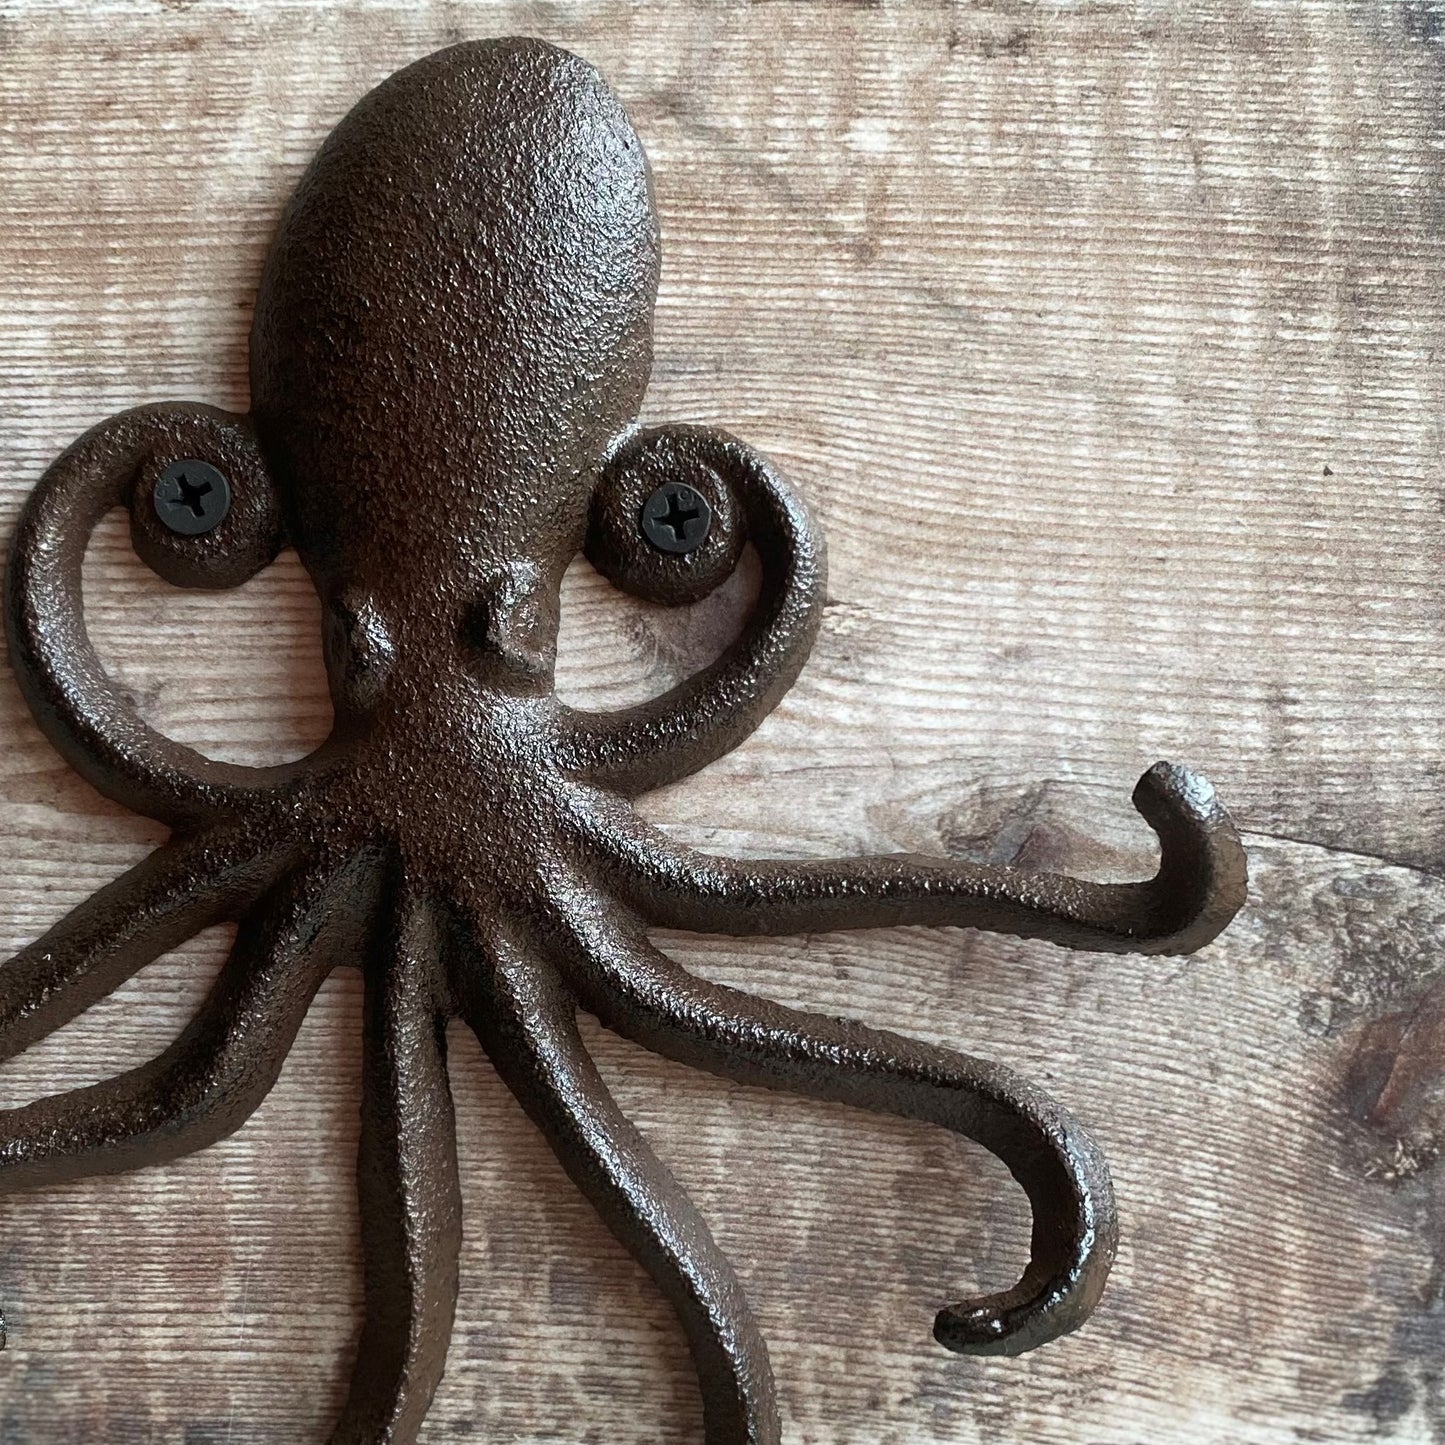 Octopus Wall Hook Rack in Cast Iron (Set of 2)